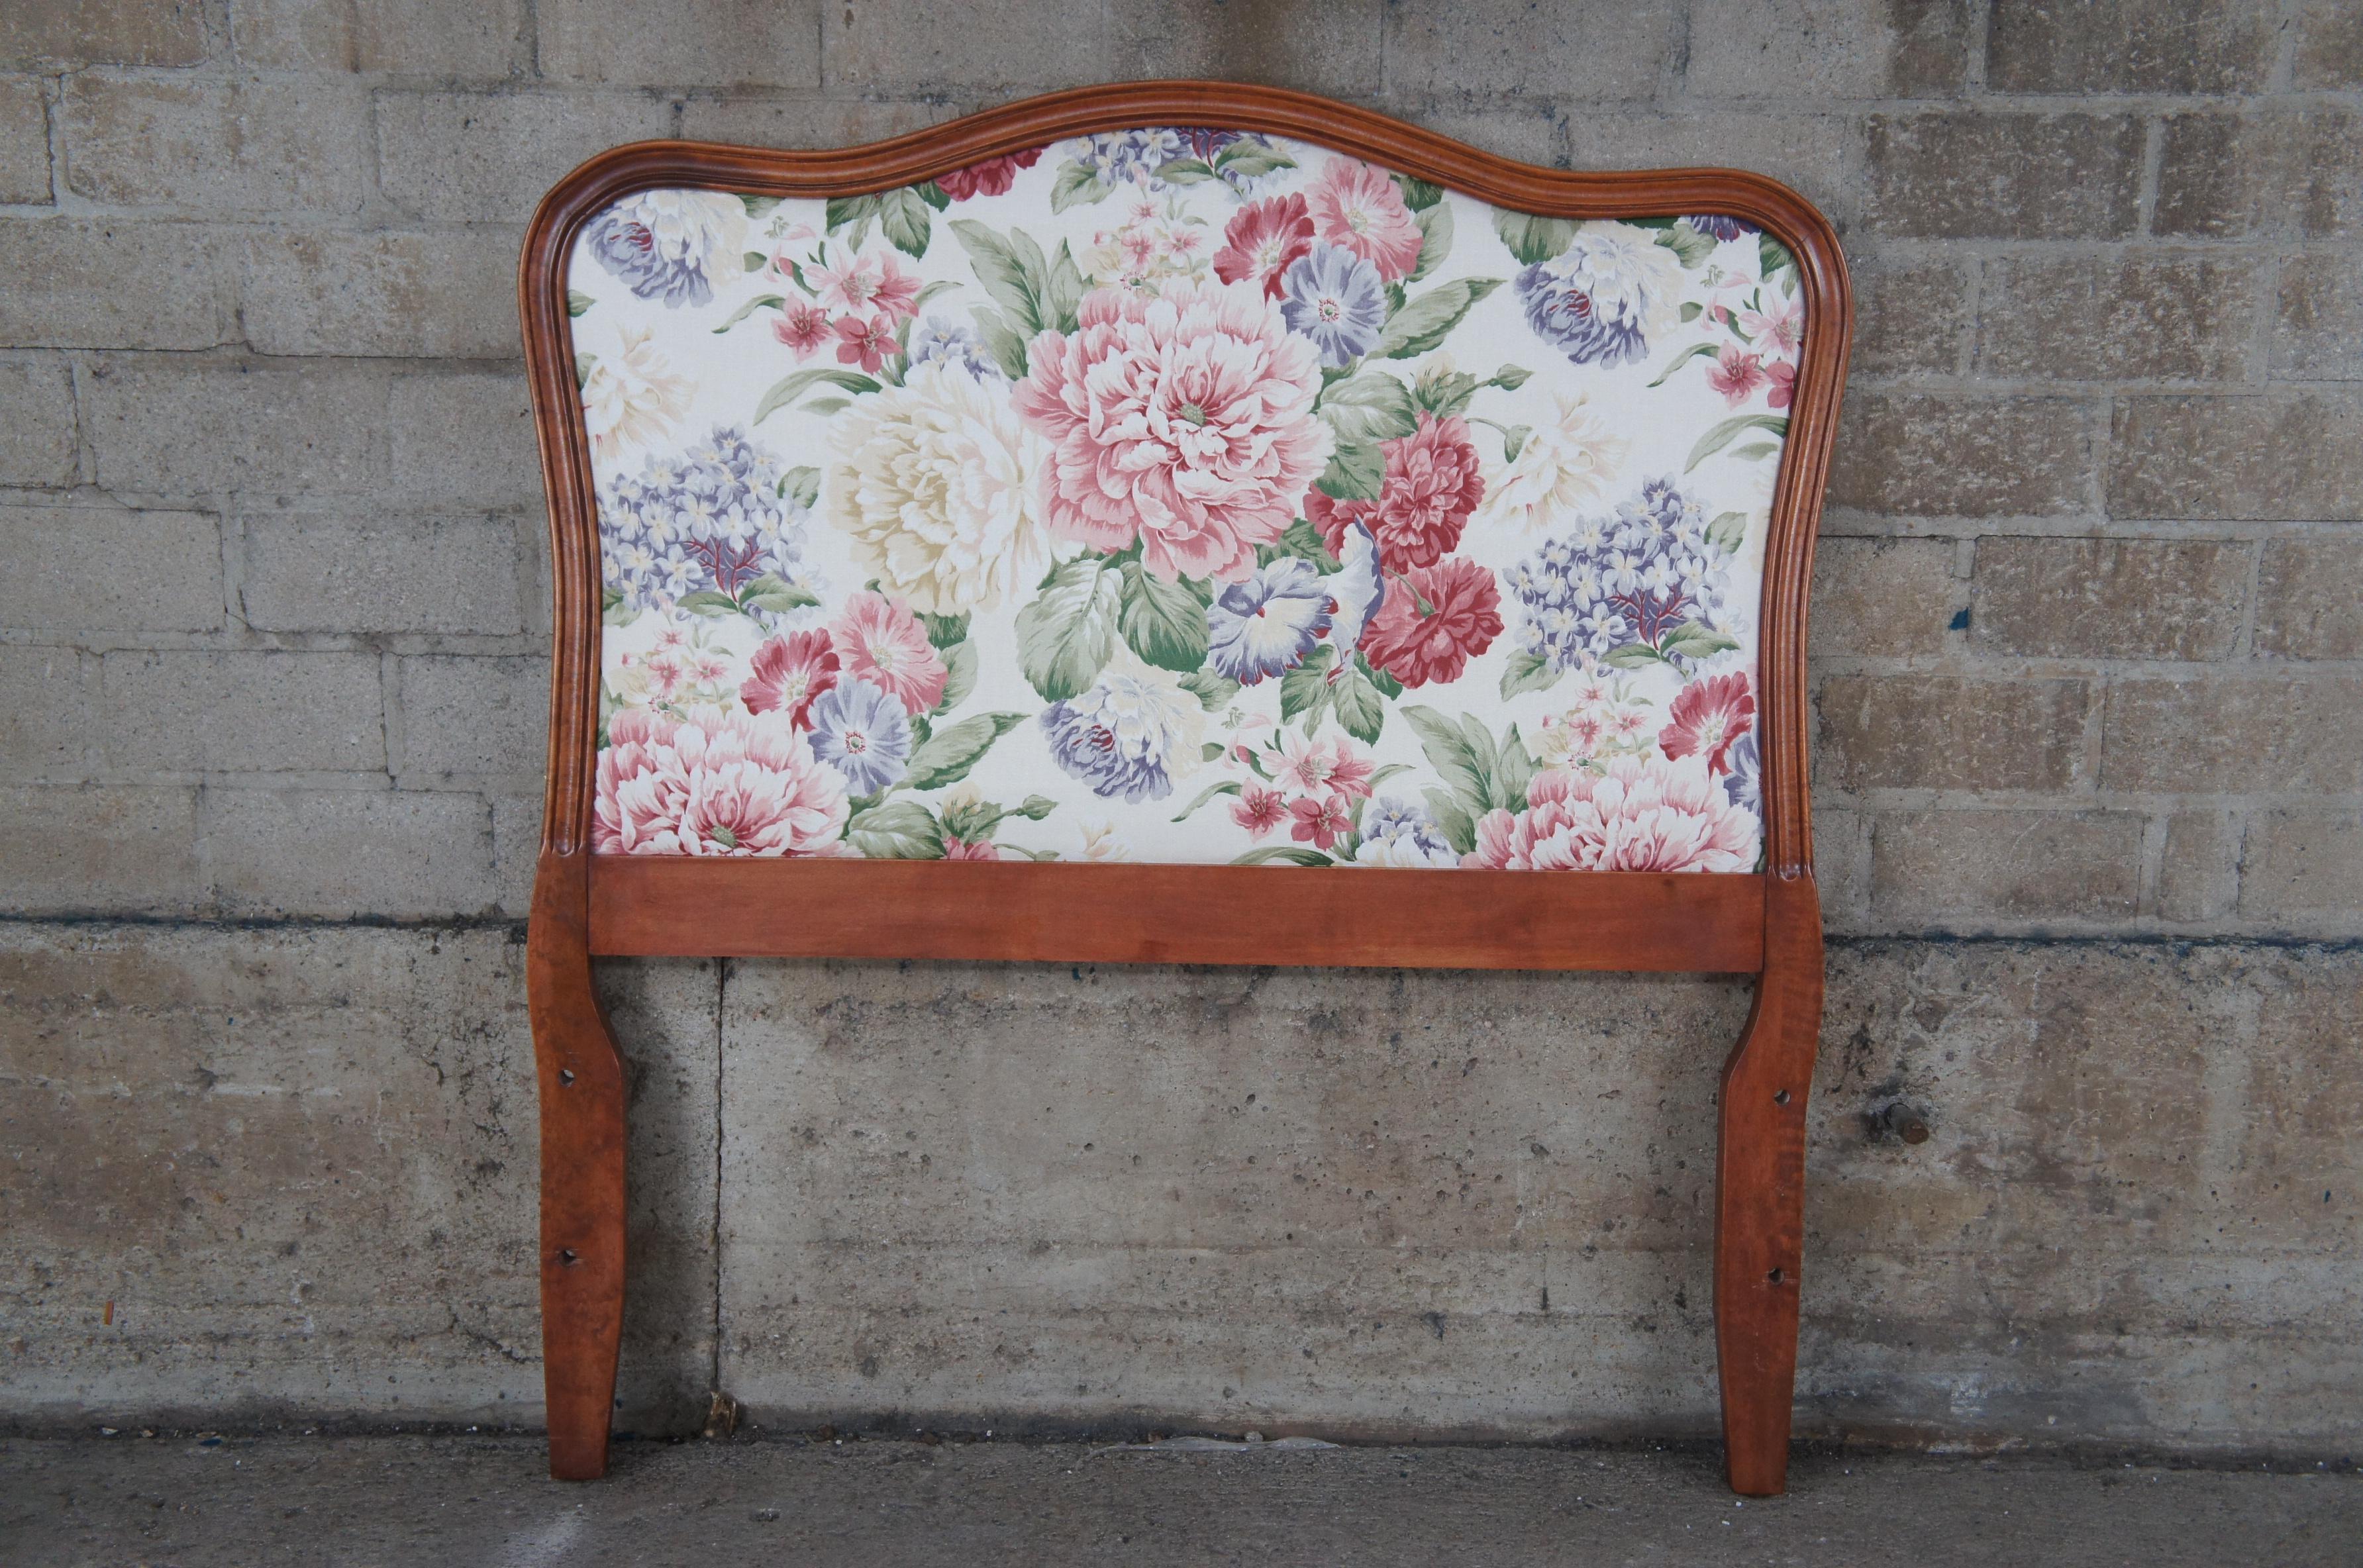 Upholstery Mid Century French Provincial Mahogany Floral Upholstered Twin Beds & Arm Chair  For Sale